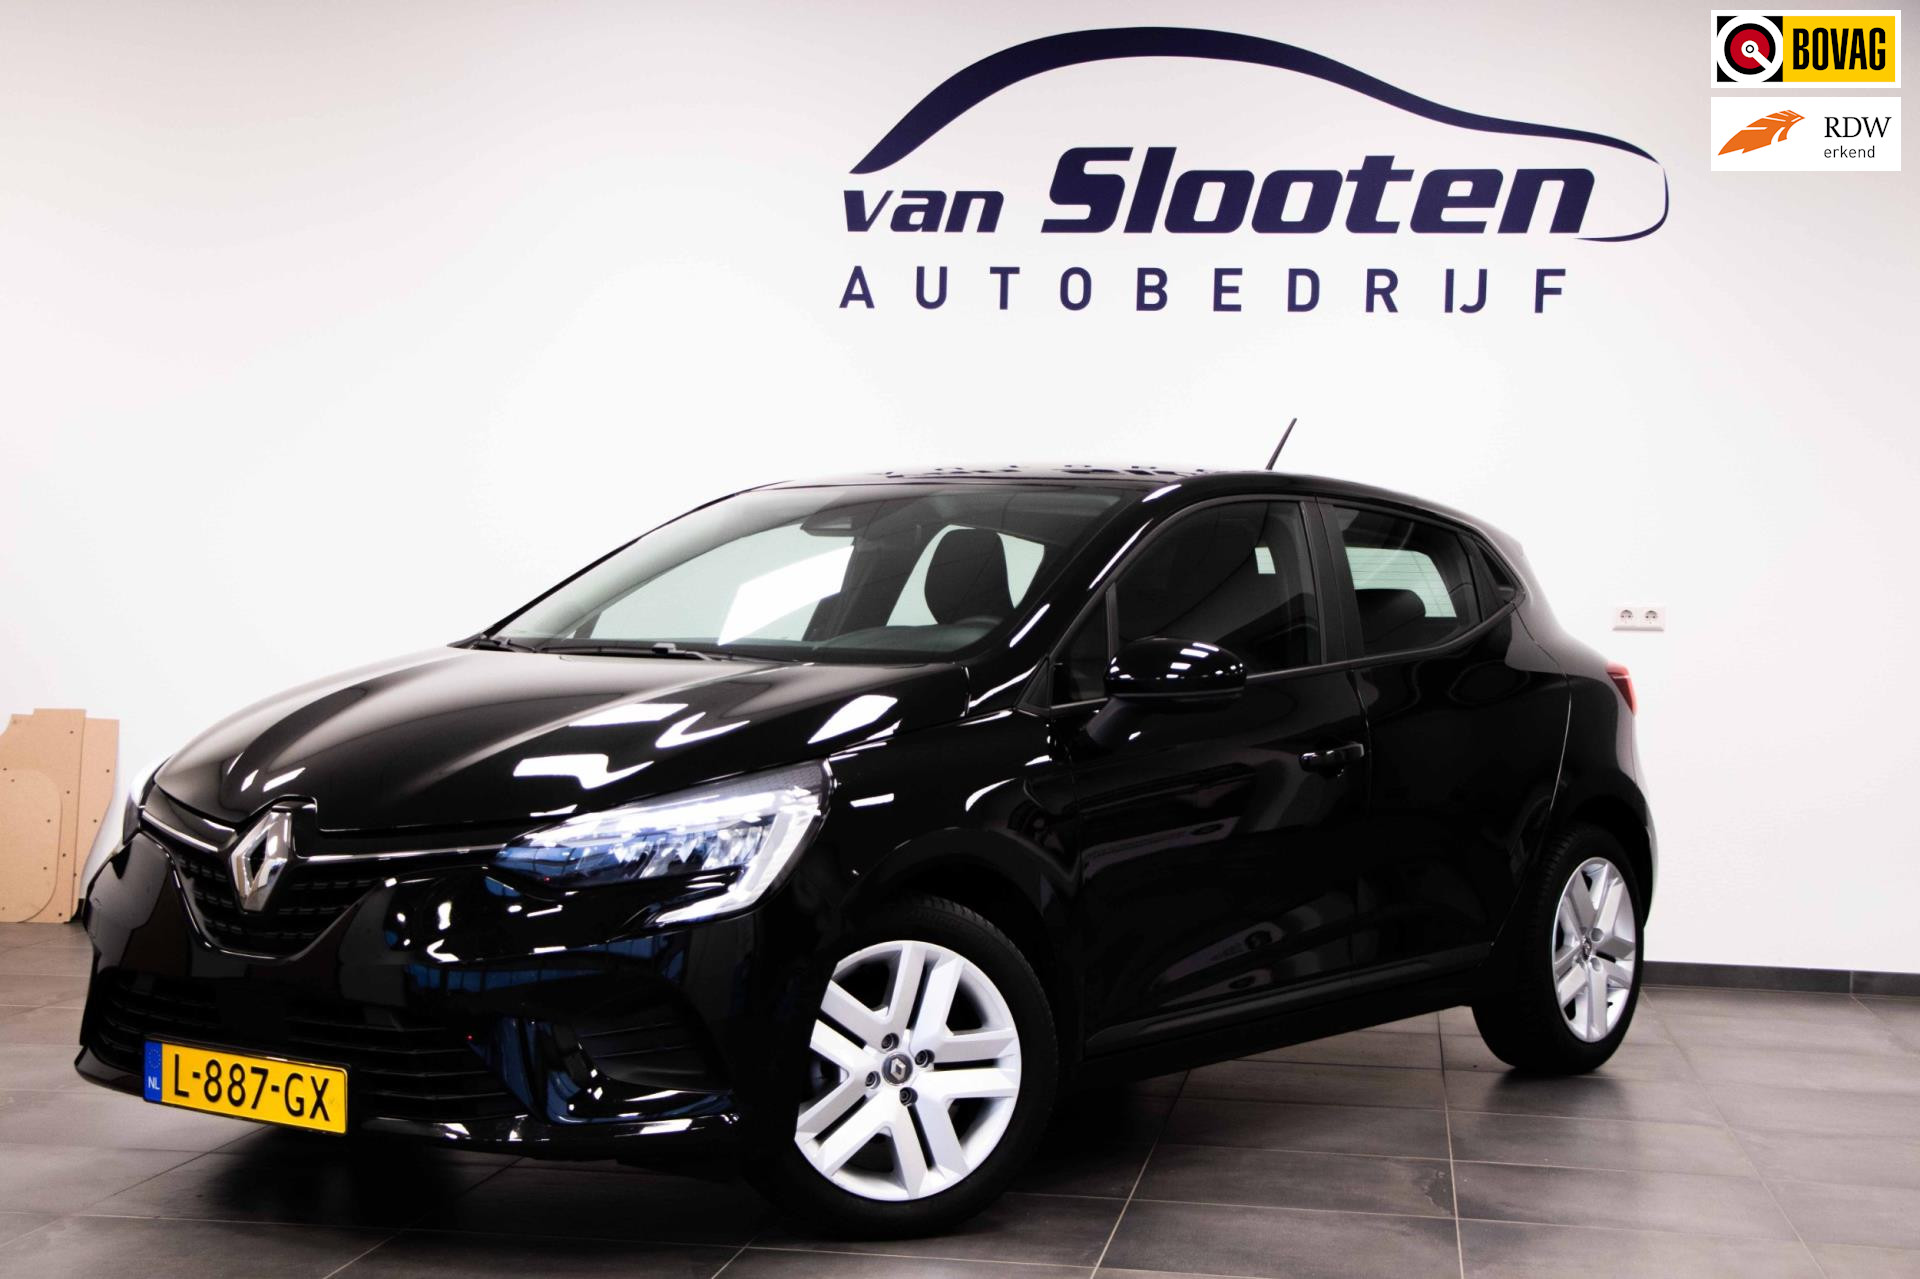 Renault Clio 1.0 TCe Zen| Dab| Cruise| Android Auto/Apple Car Play bij viaBOVAG.nl